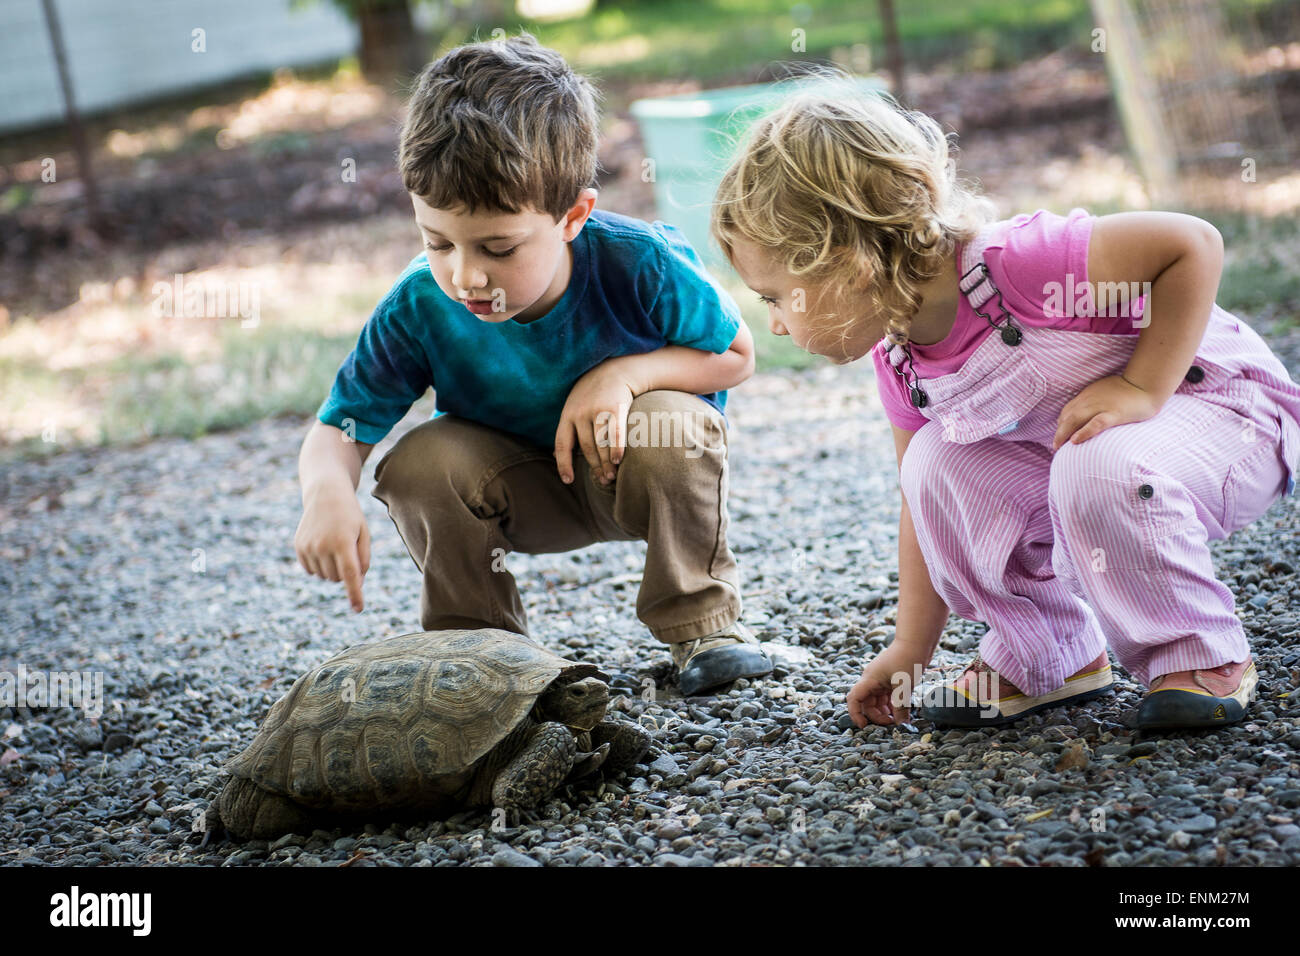 Toddler boy and girl observe pet tortoise on local farm in Chico, California. Stock Photo